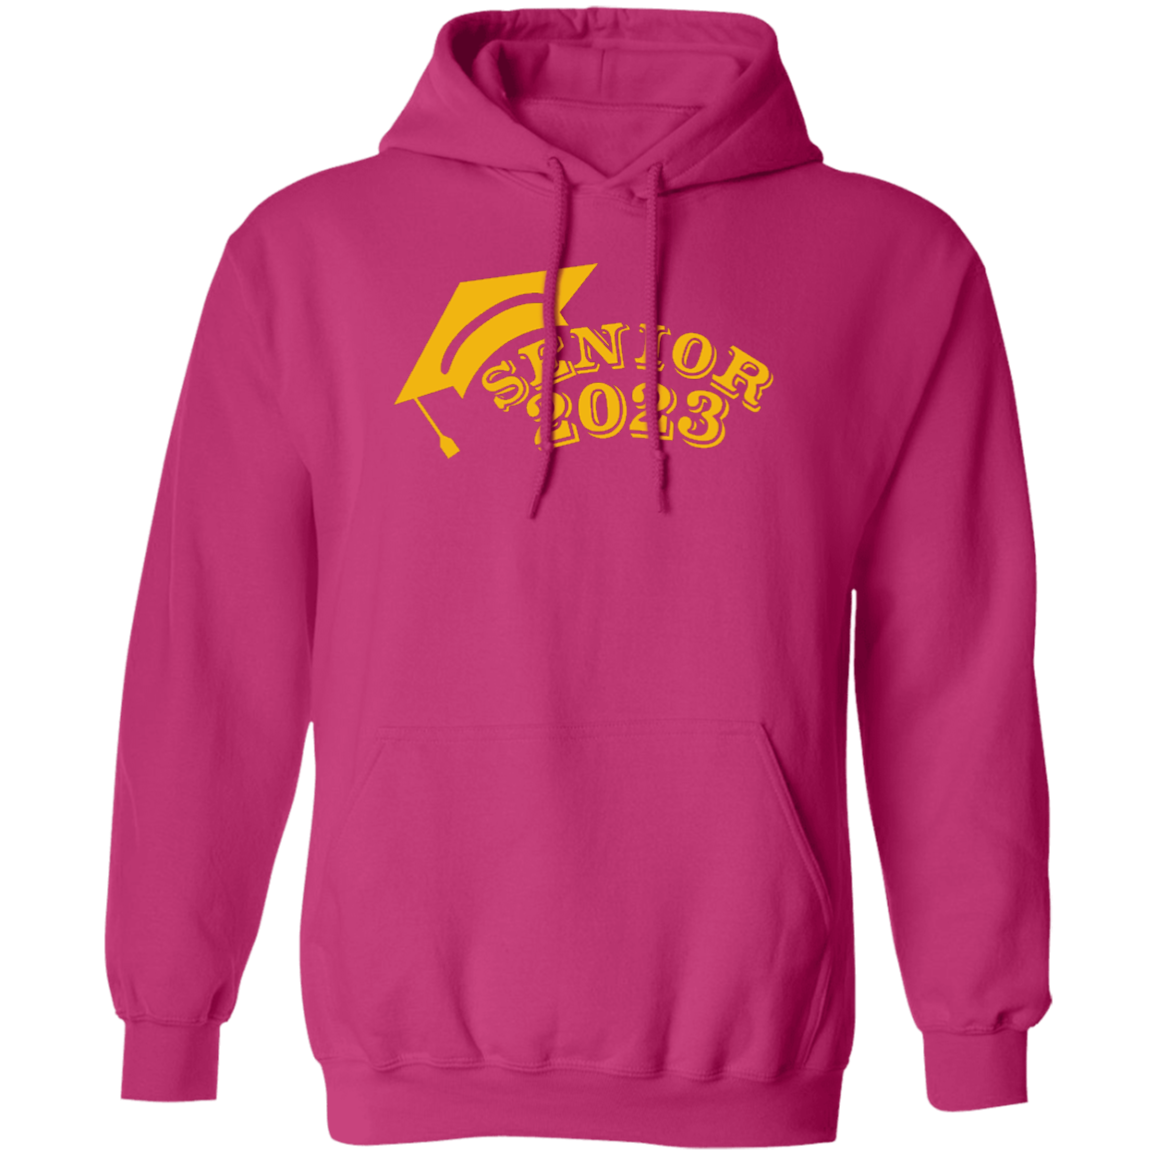 2023 Gold Pullover Hoodie